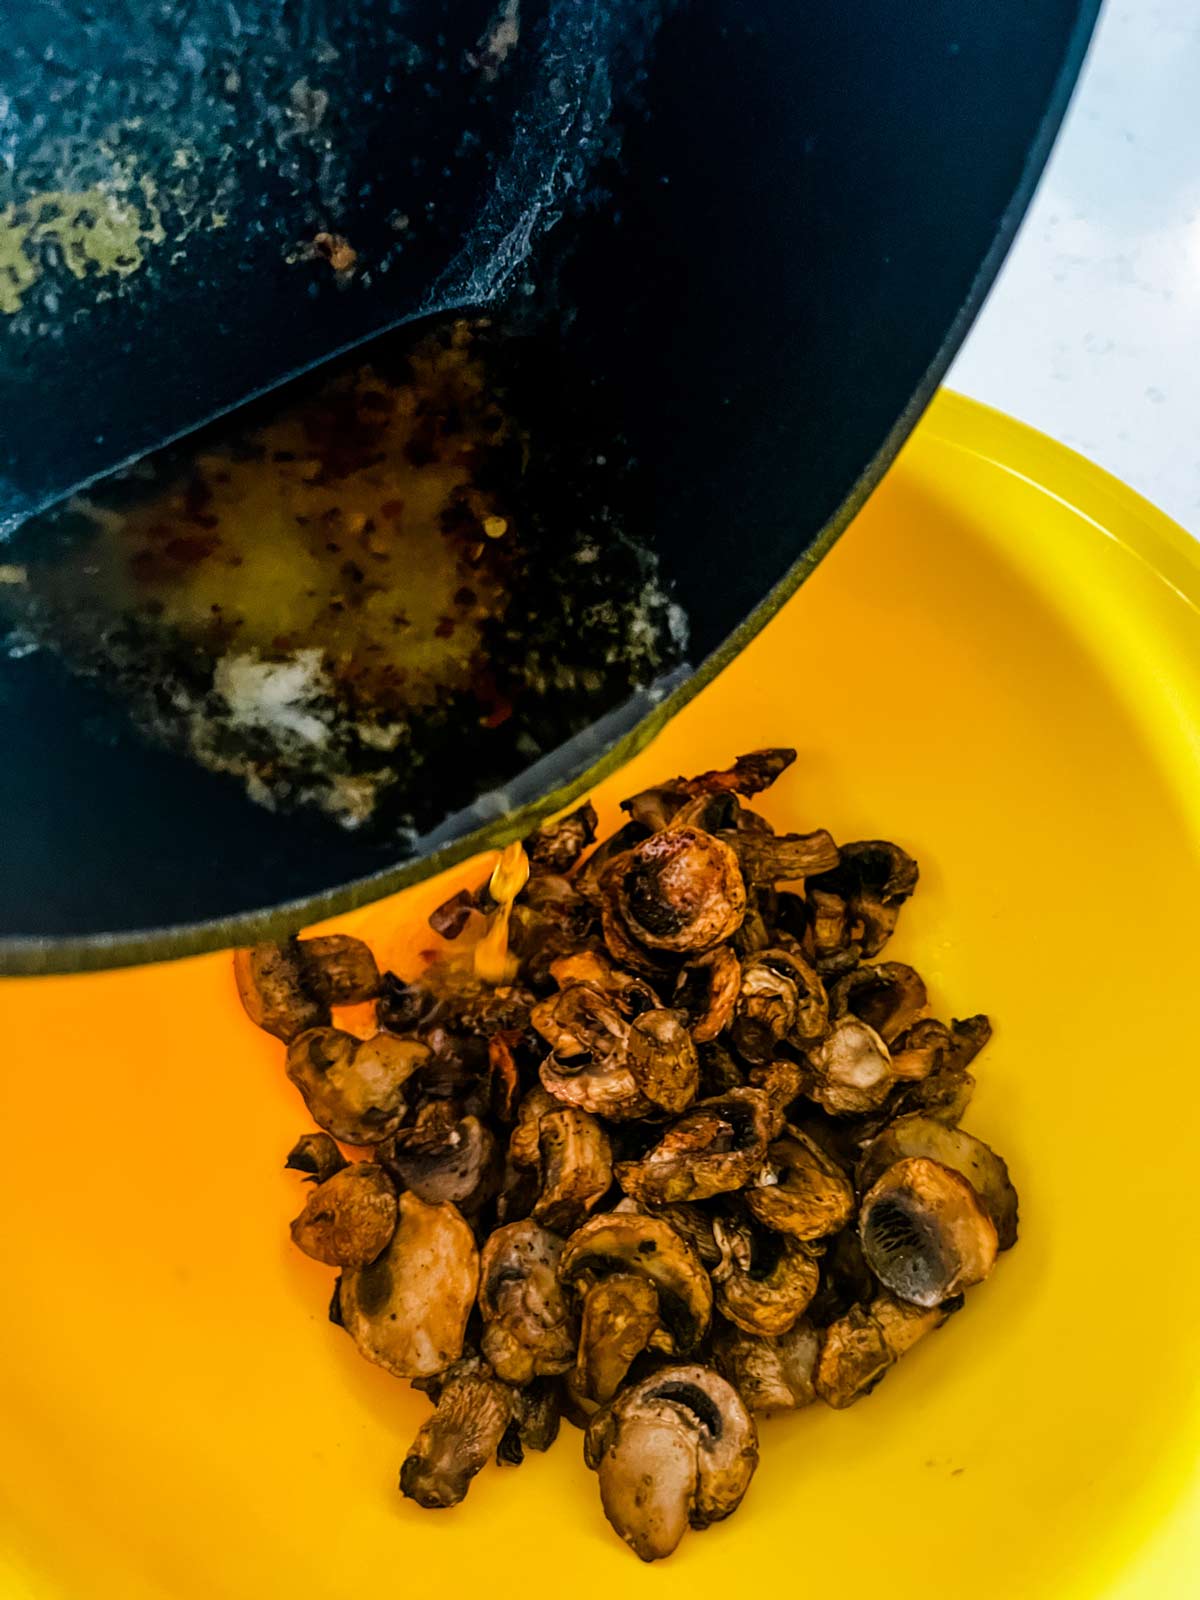 Butter being poured over air fryer mushrooms in a yellow bowl.